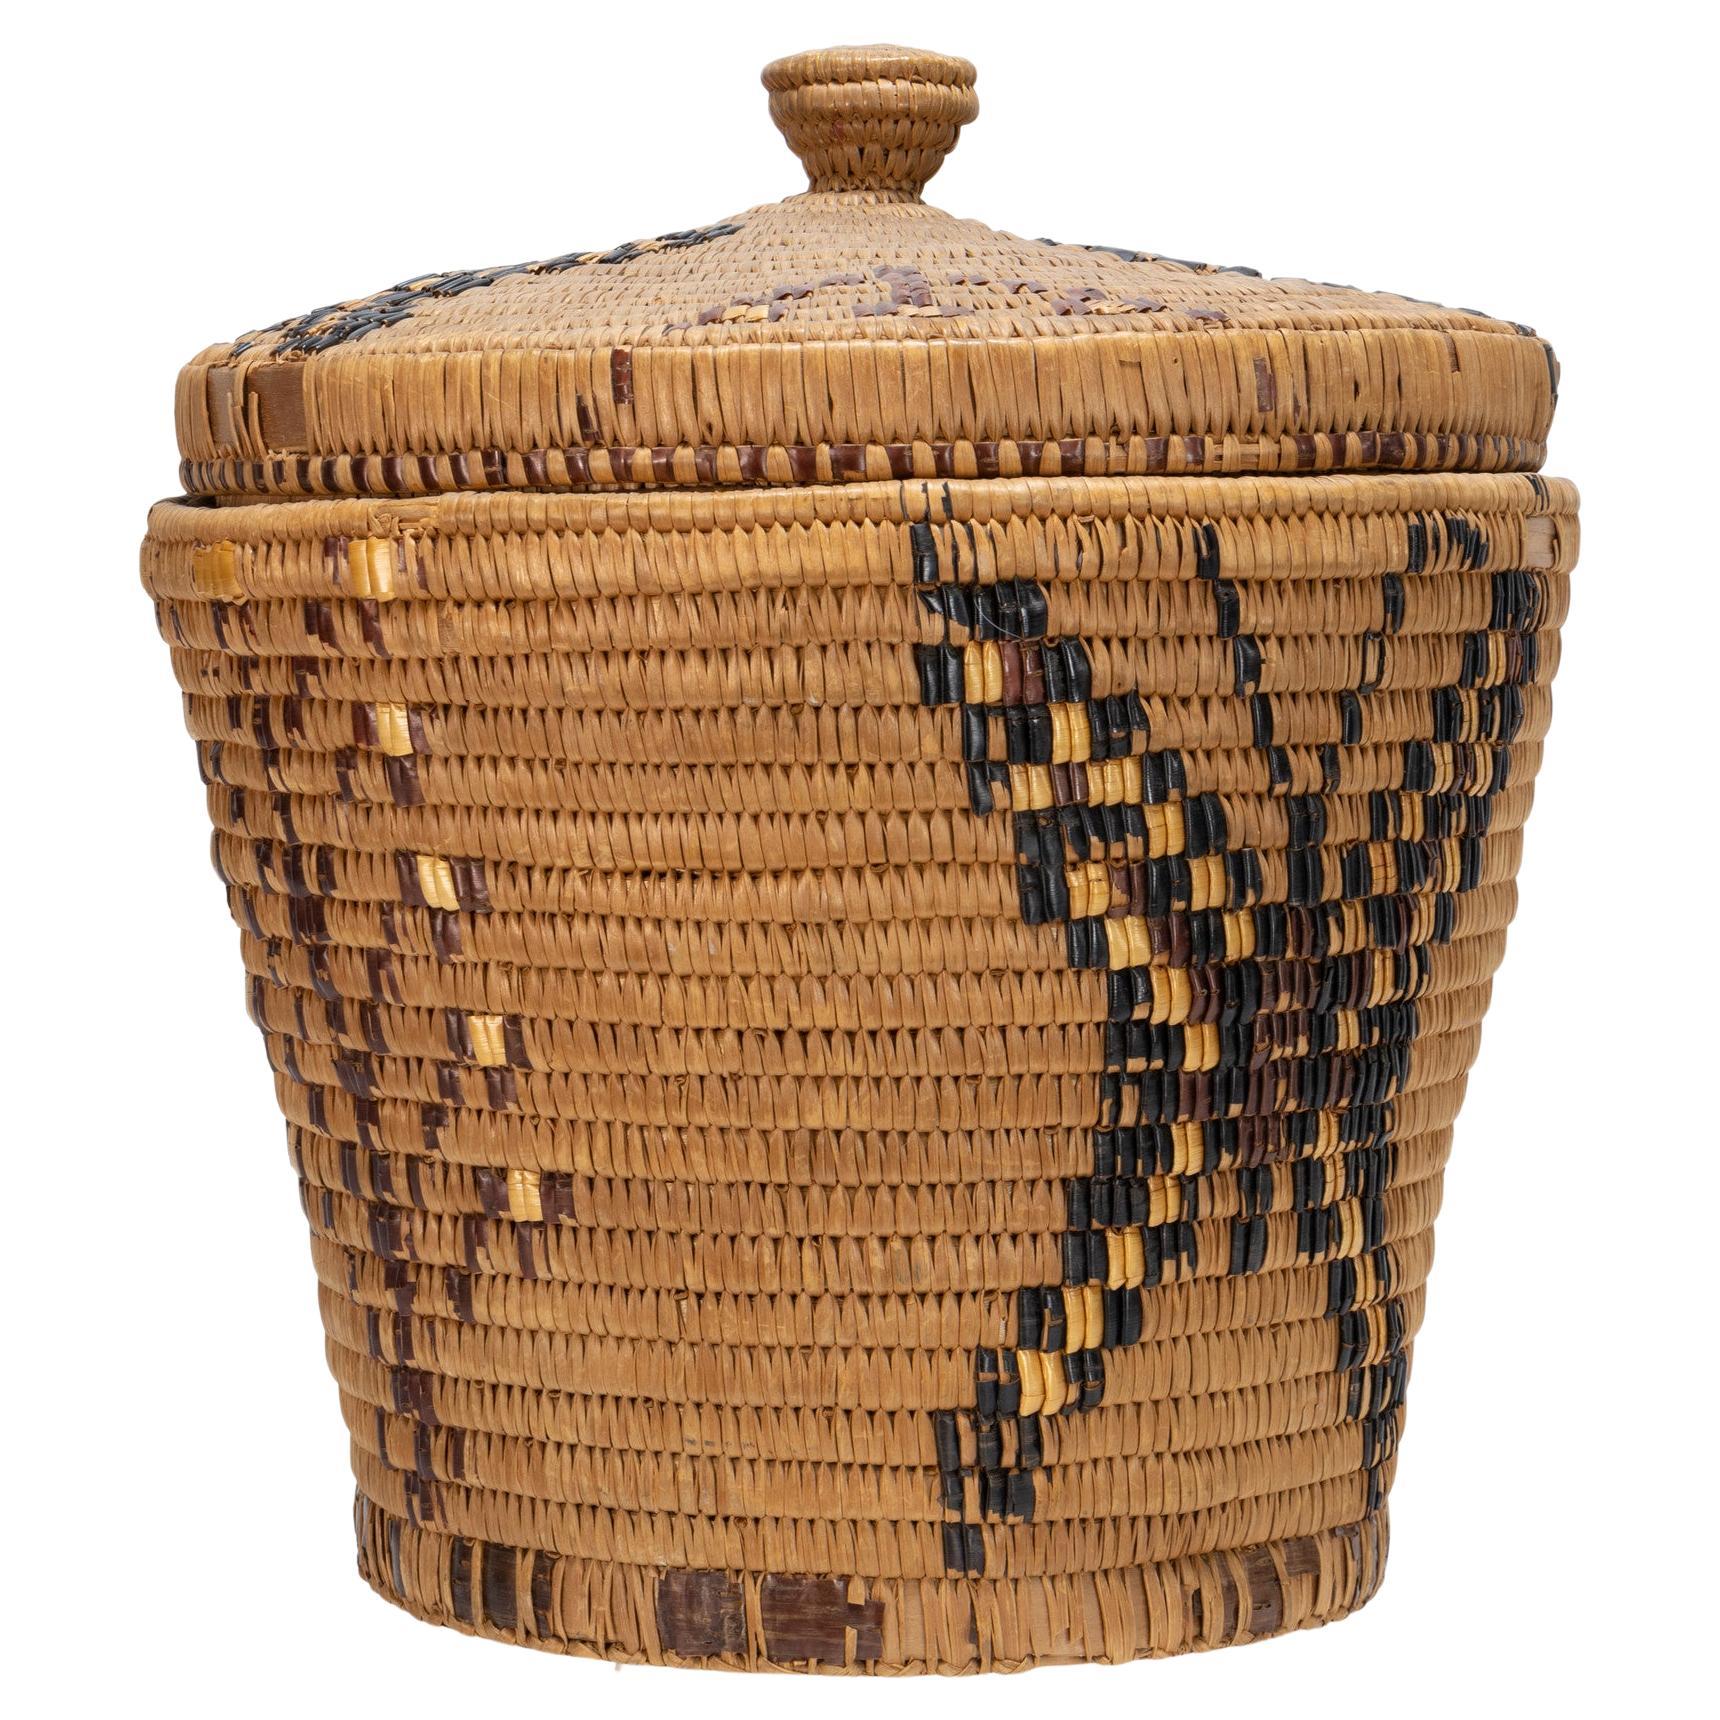 What did Native Americans use for baskets?